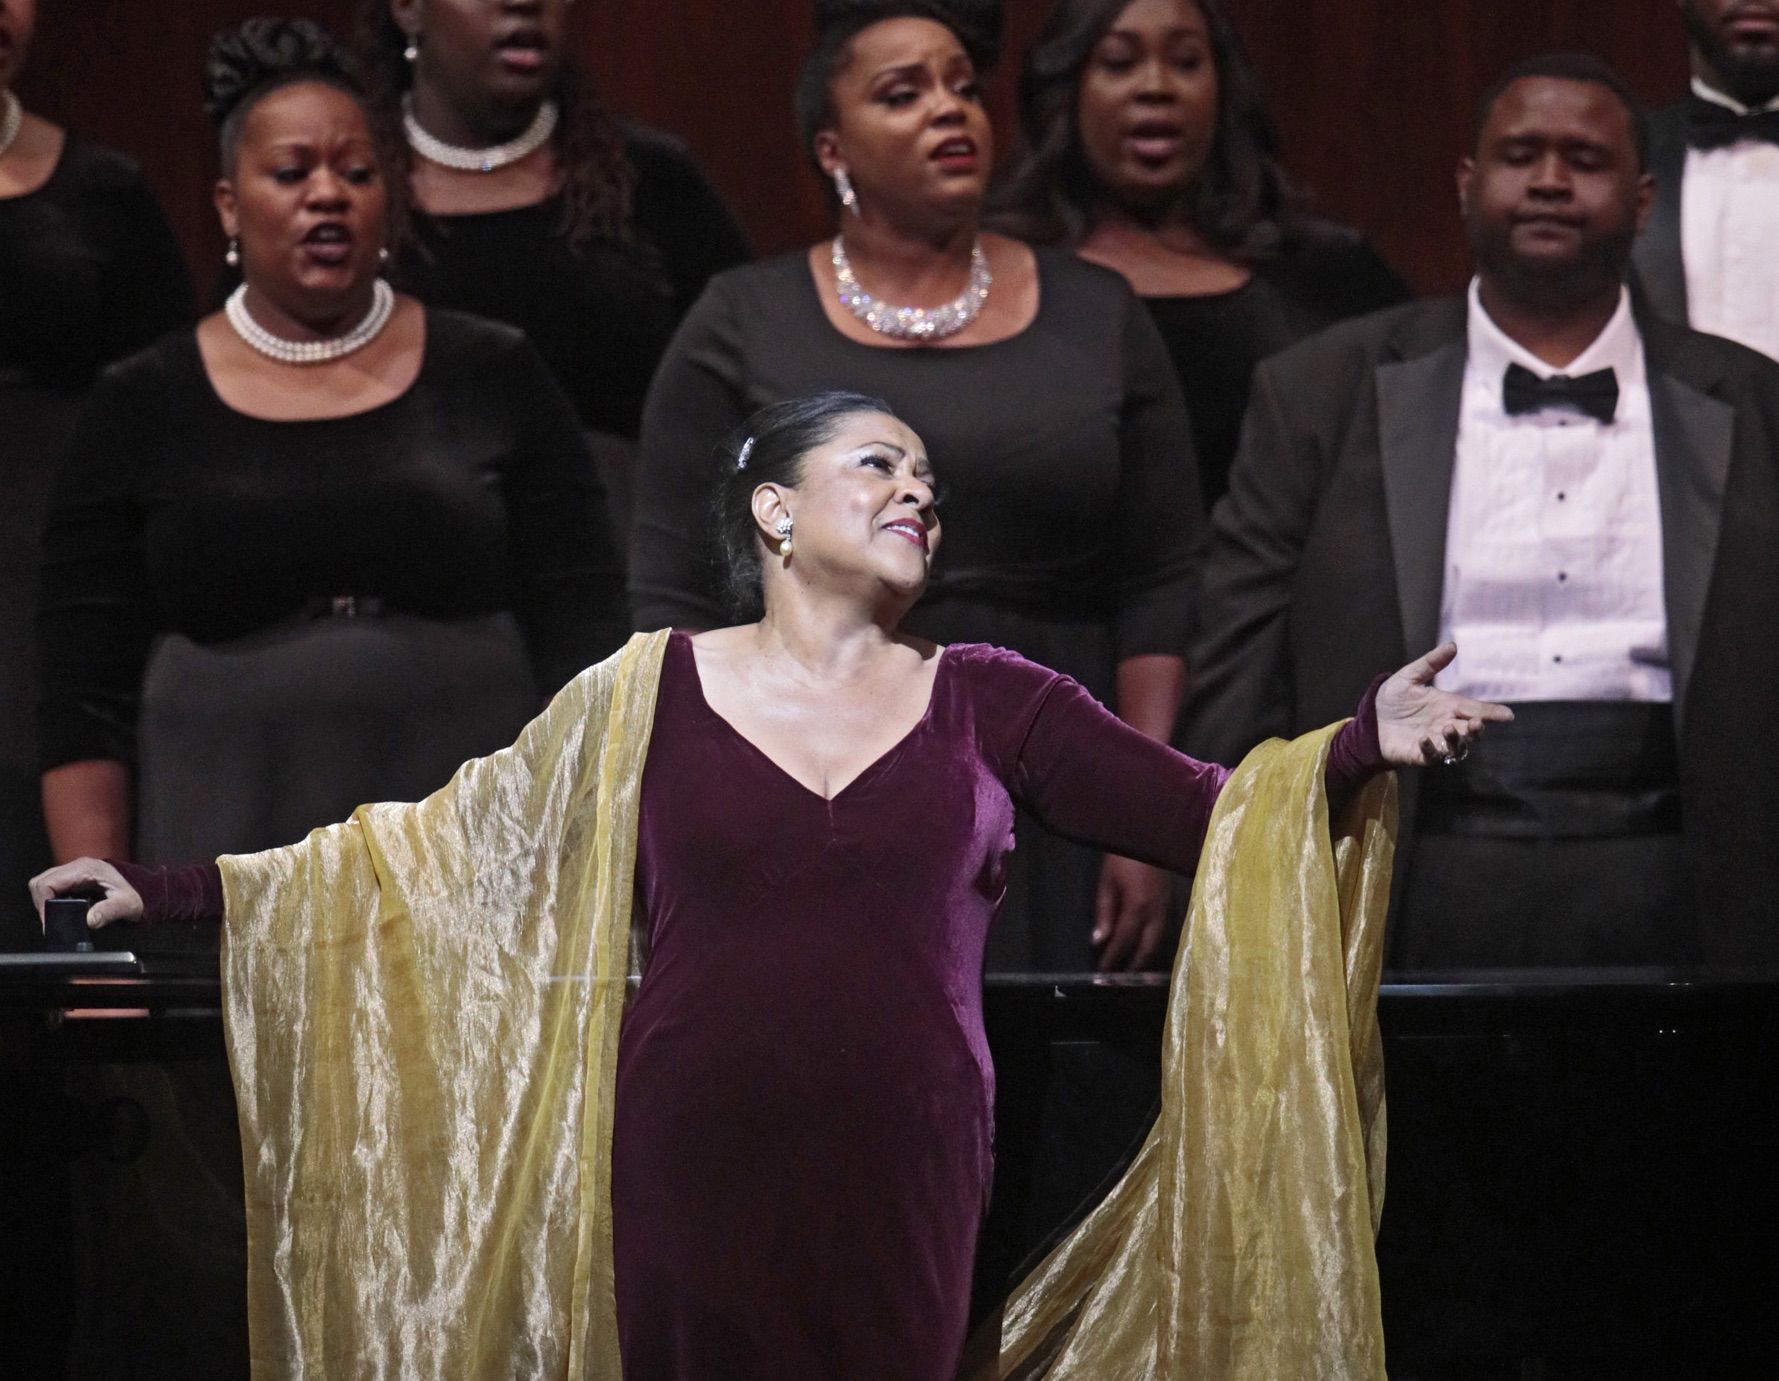 CLASSY COMEBACK: Storied soprano returns, in glorious voice, with powerful message